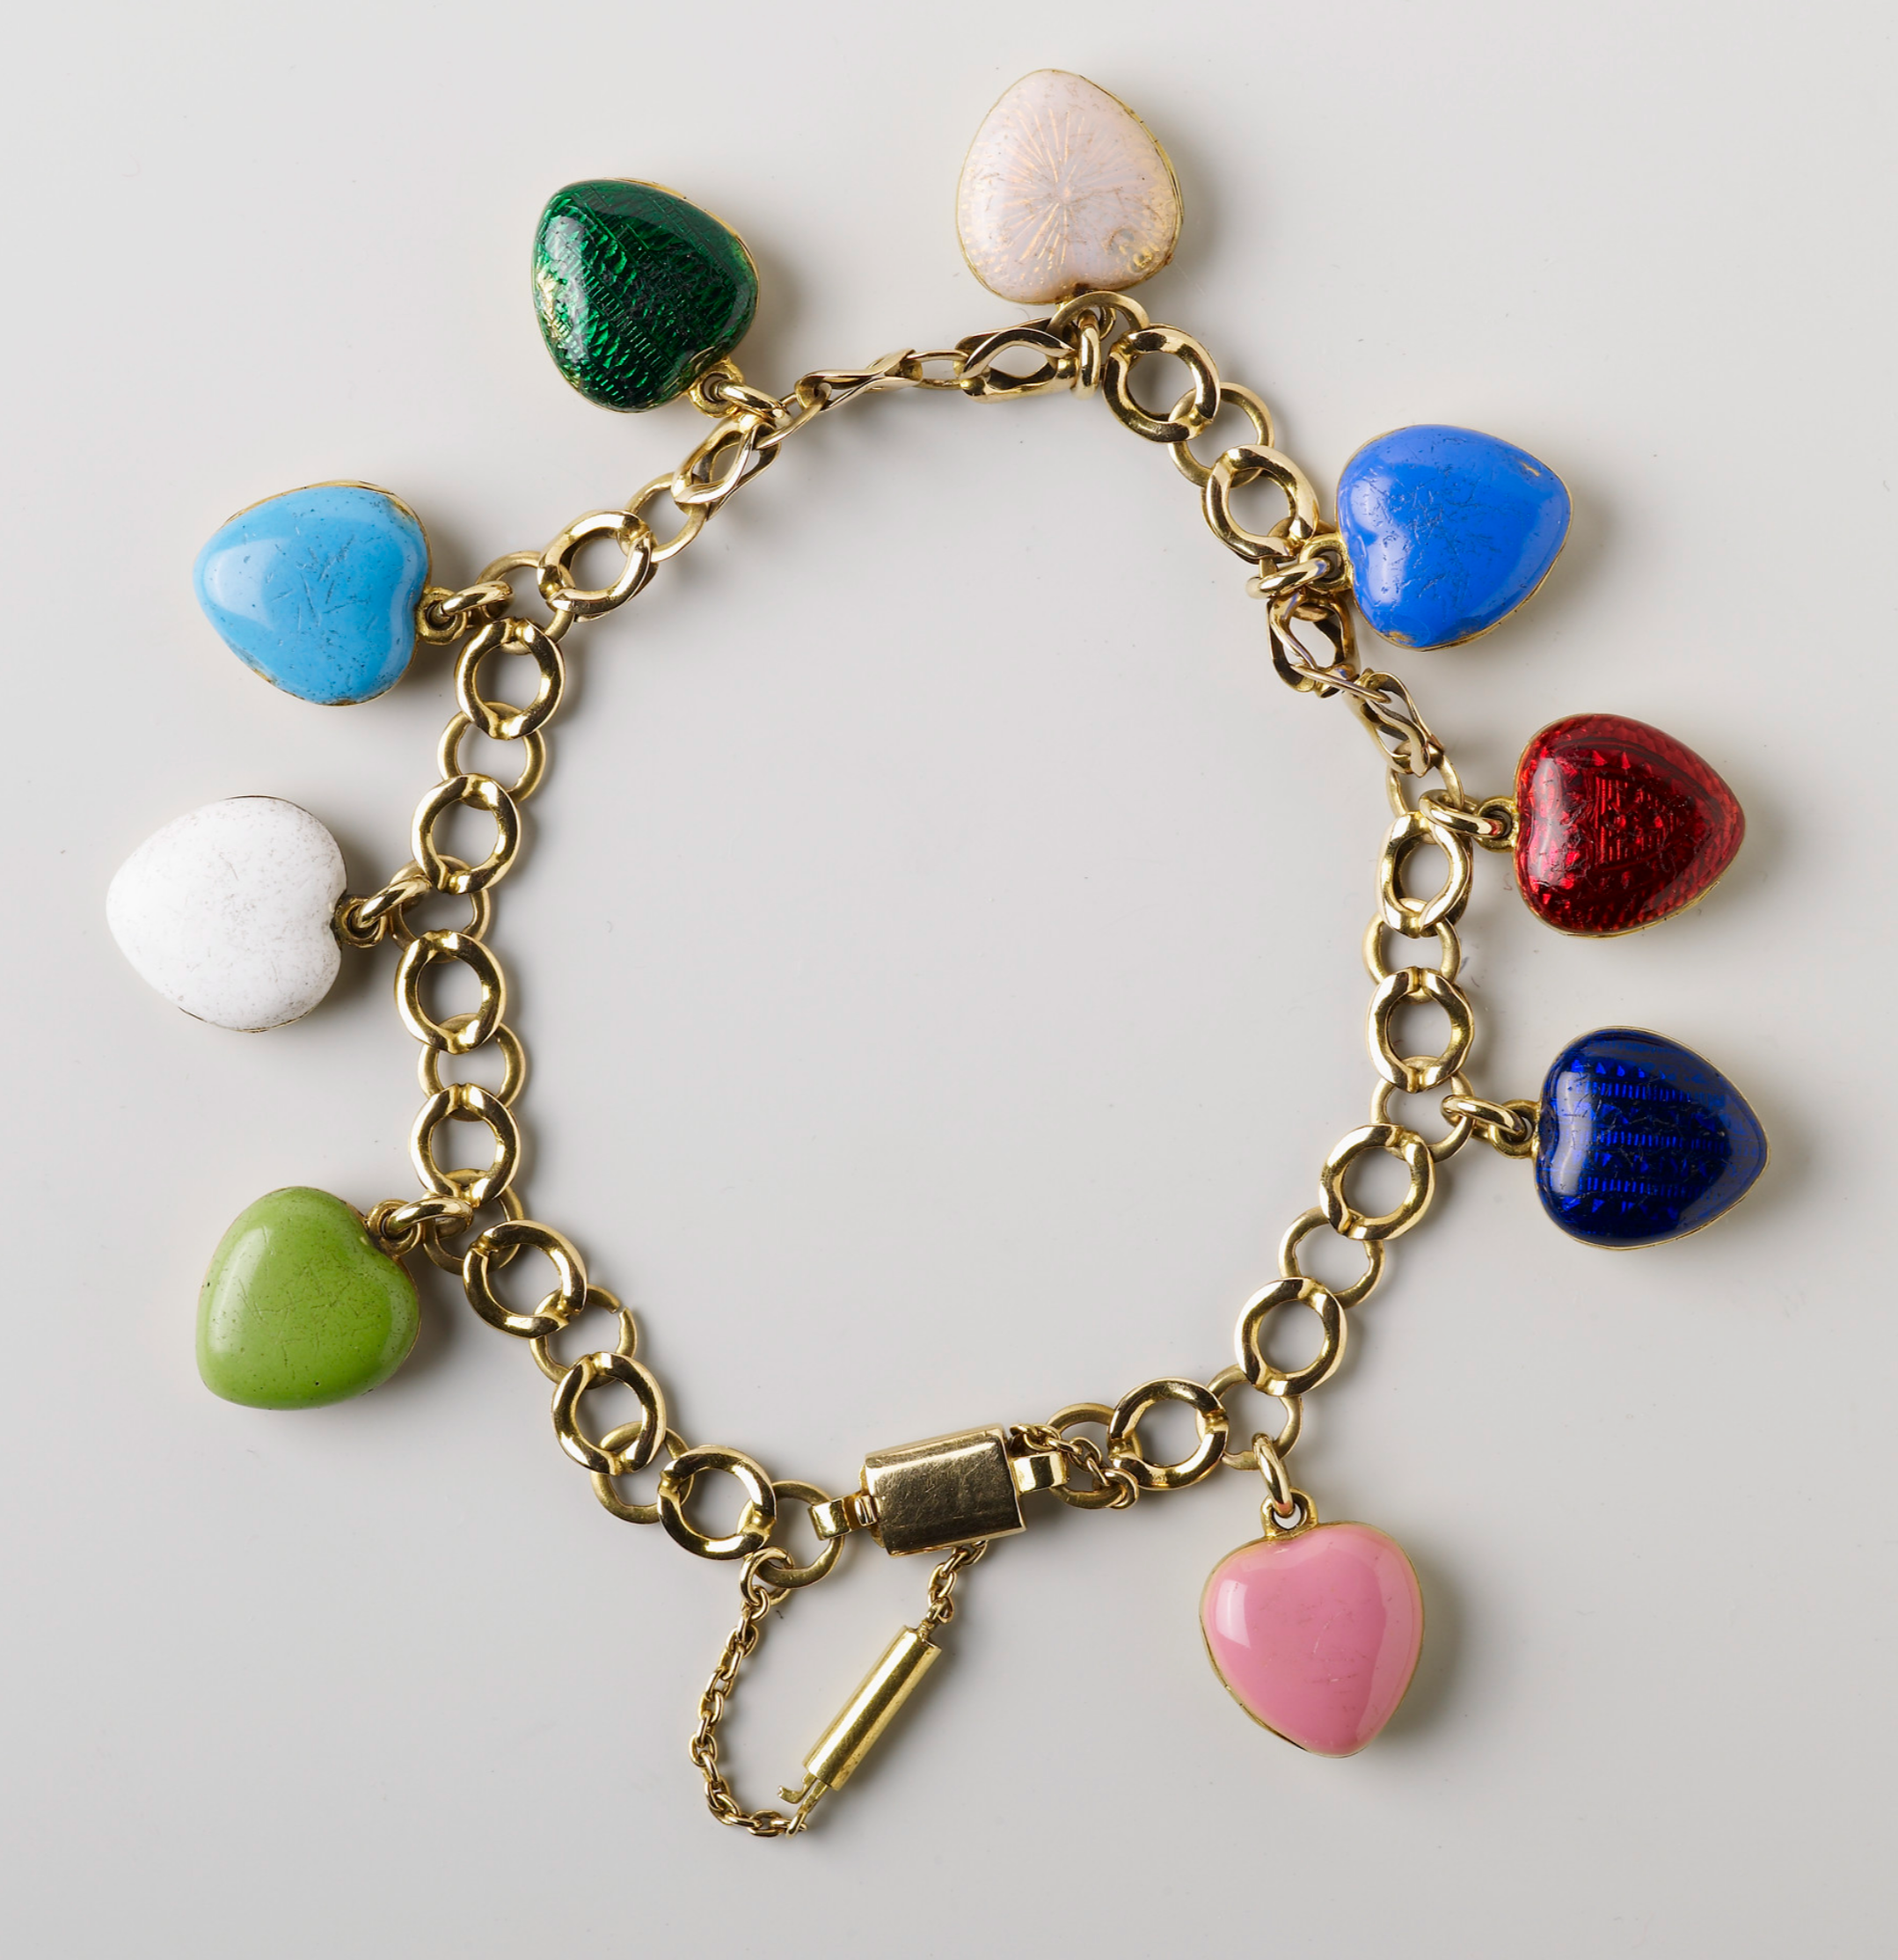 Queen Victoria's bracelet with lockets for each child: pink for Princess Victoria, turquoise blue for Albert, red for Princess Alice, dark blue for Alfred, translucent white for Helena, dark green for Louise, mid blue for Arthur, opaque white for Leopold and light green for Beatrice